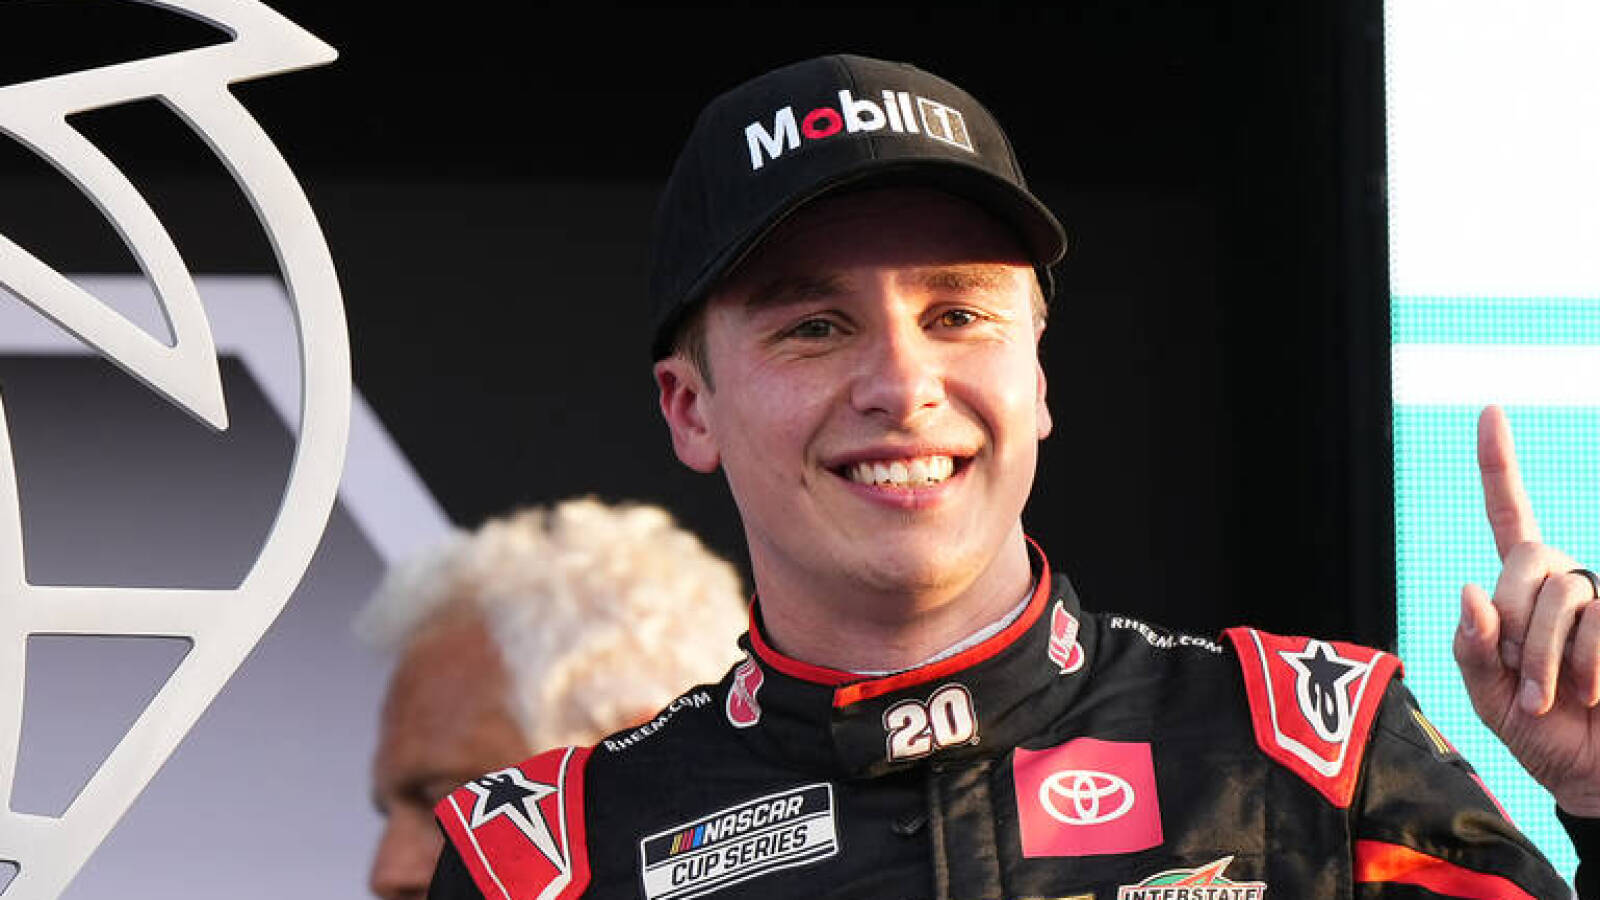 Christopher Bell had ironic comments about Cup Series race at Homestead